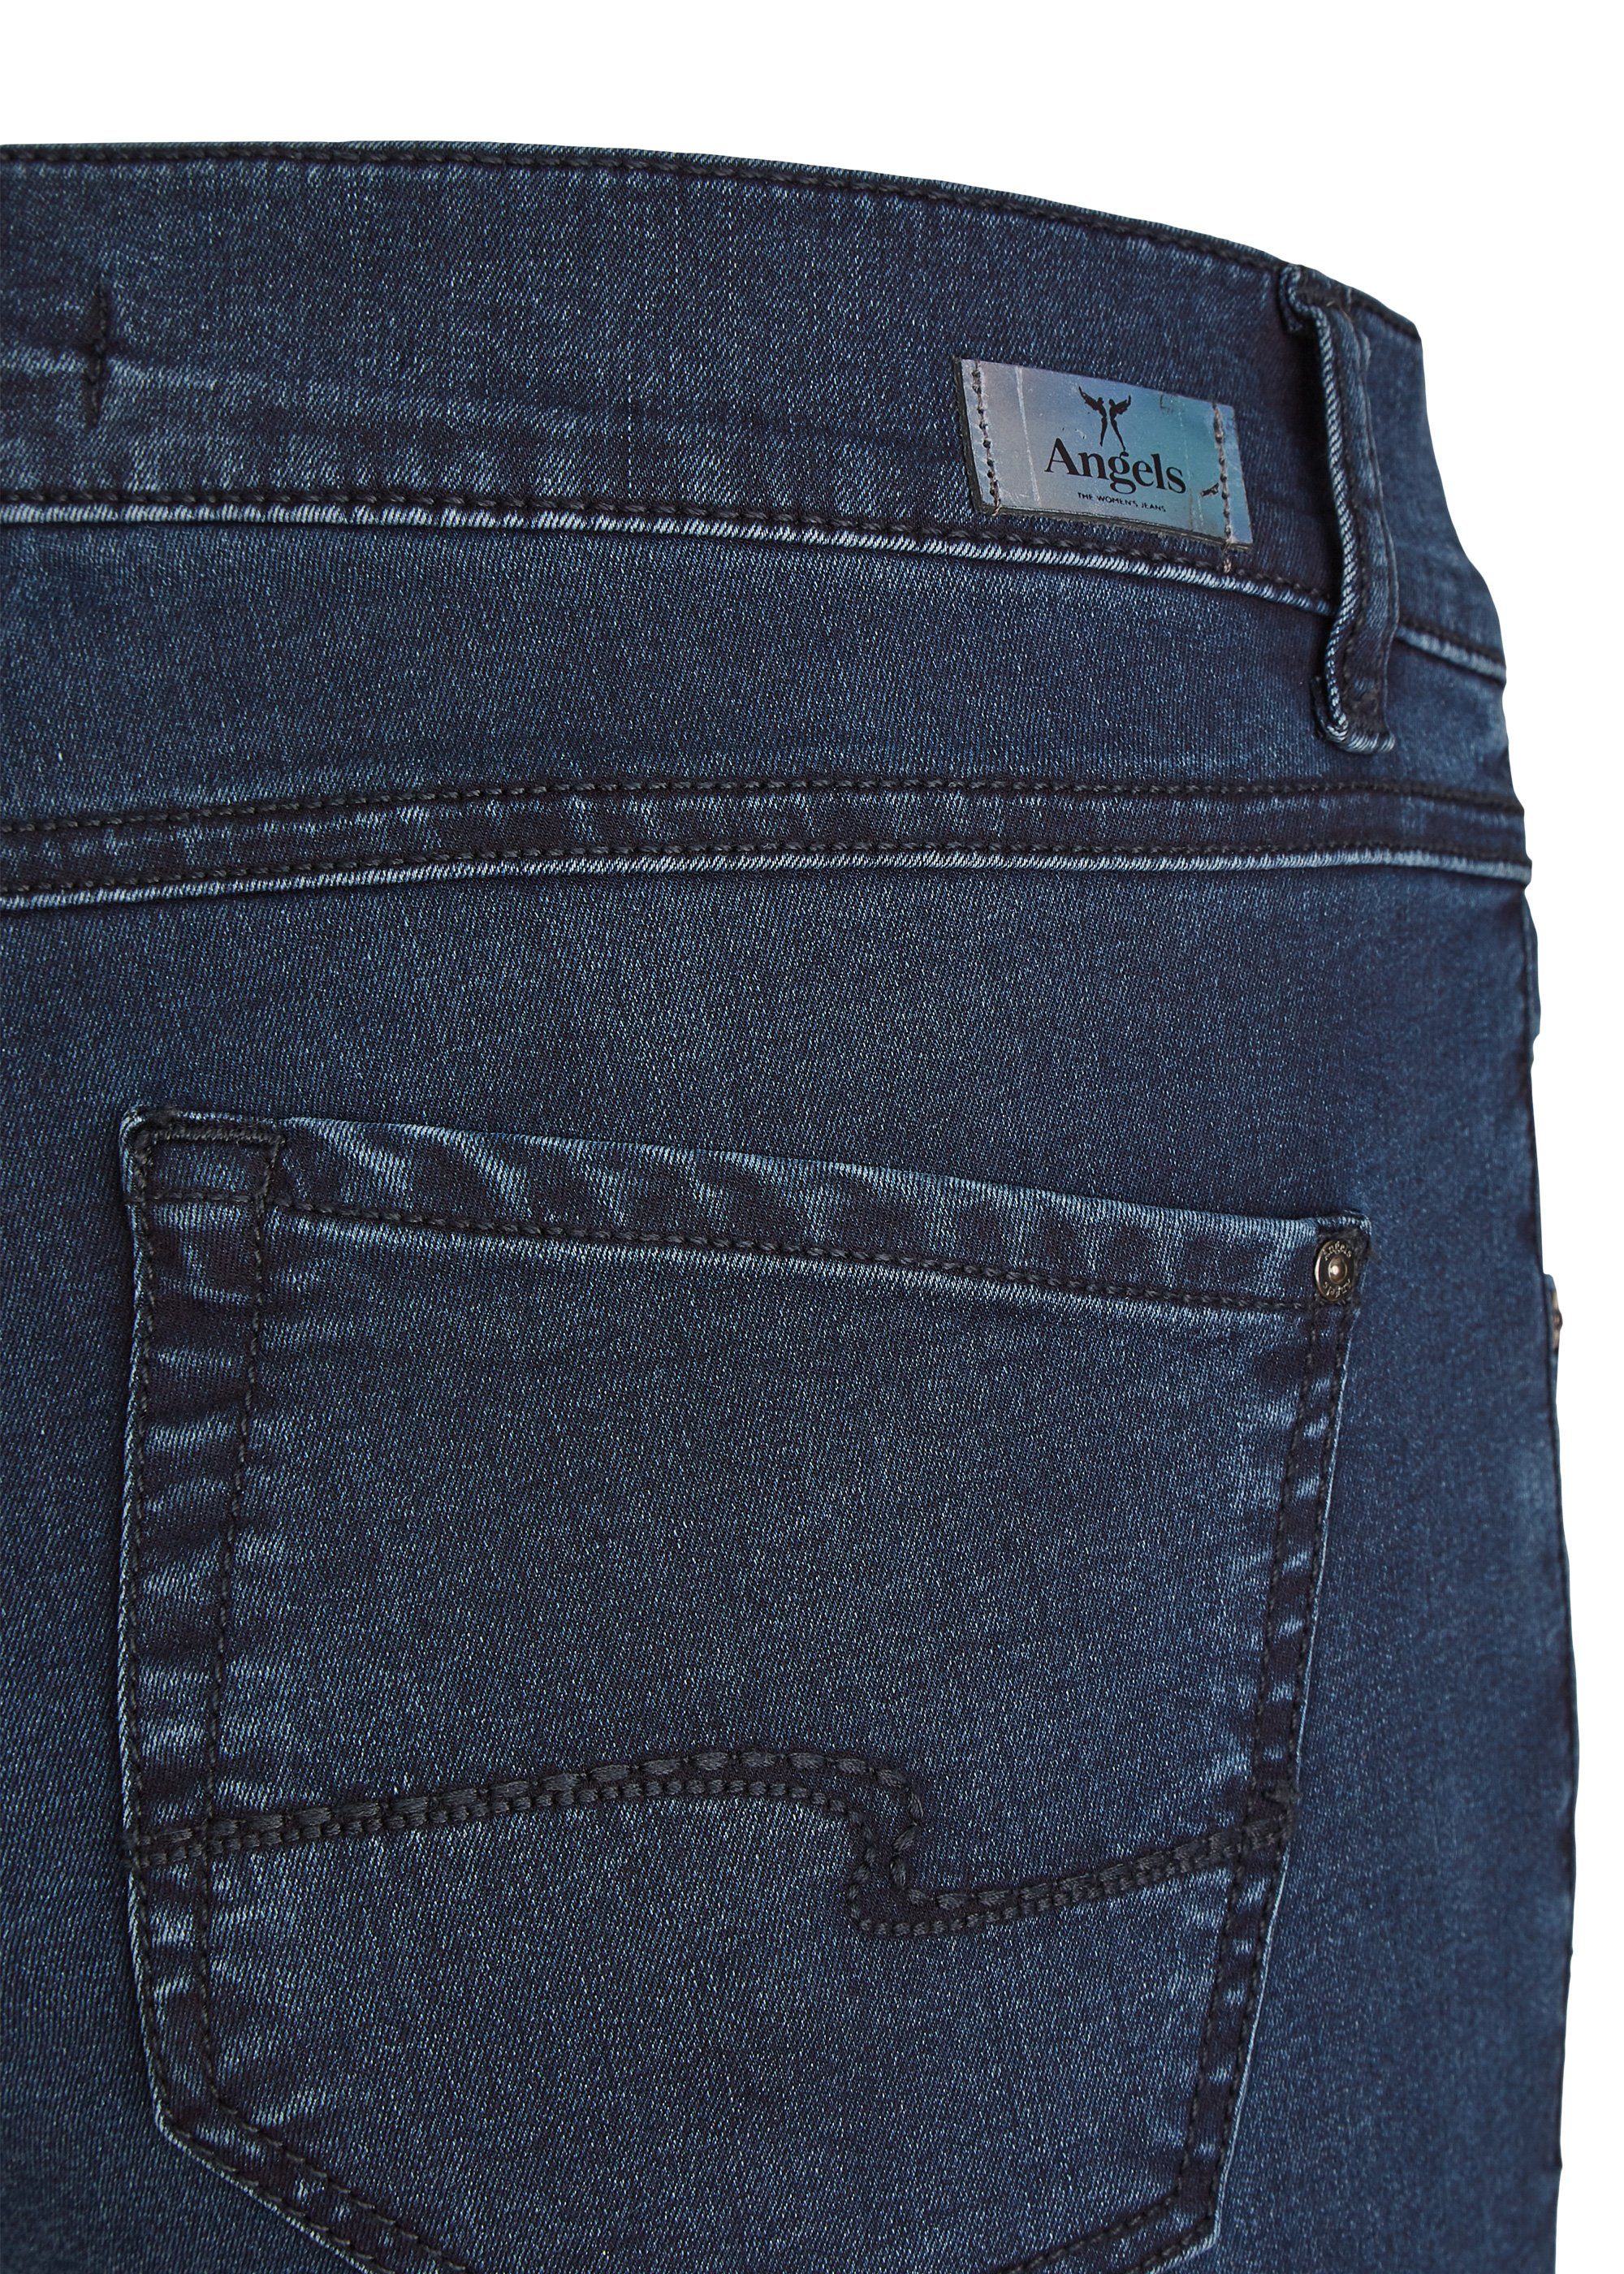 blue ANGELS Stretch-Jeans blue ANGELS CICI night JEANS 34.30 519 30 night